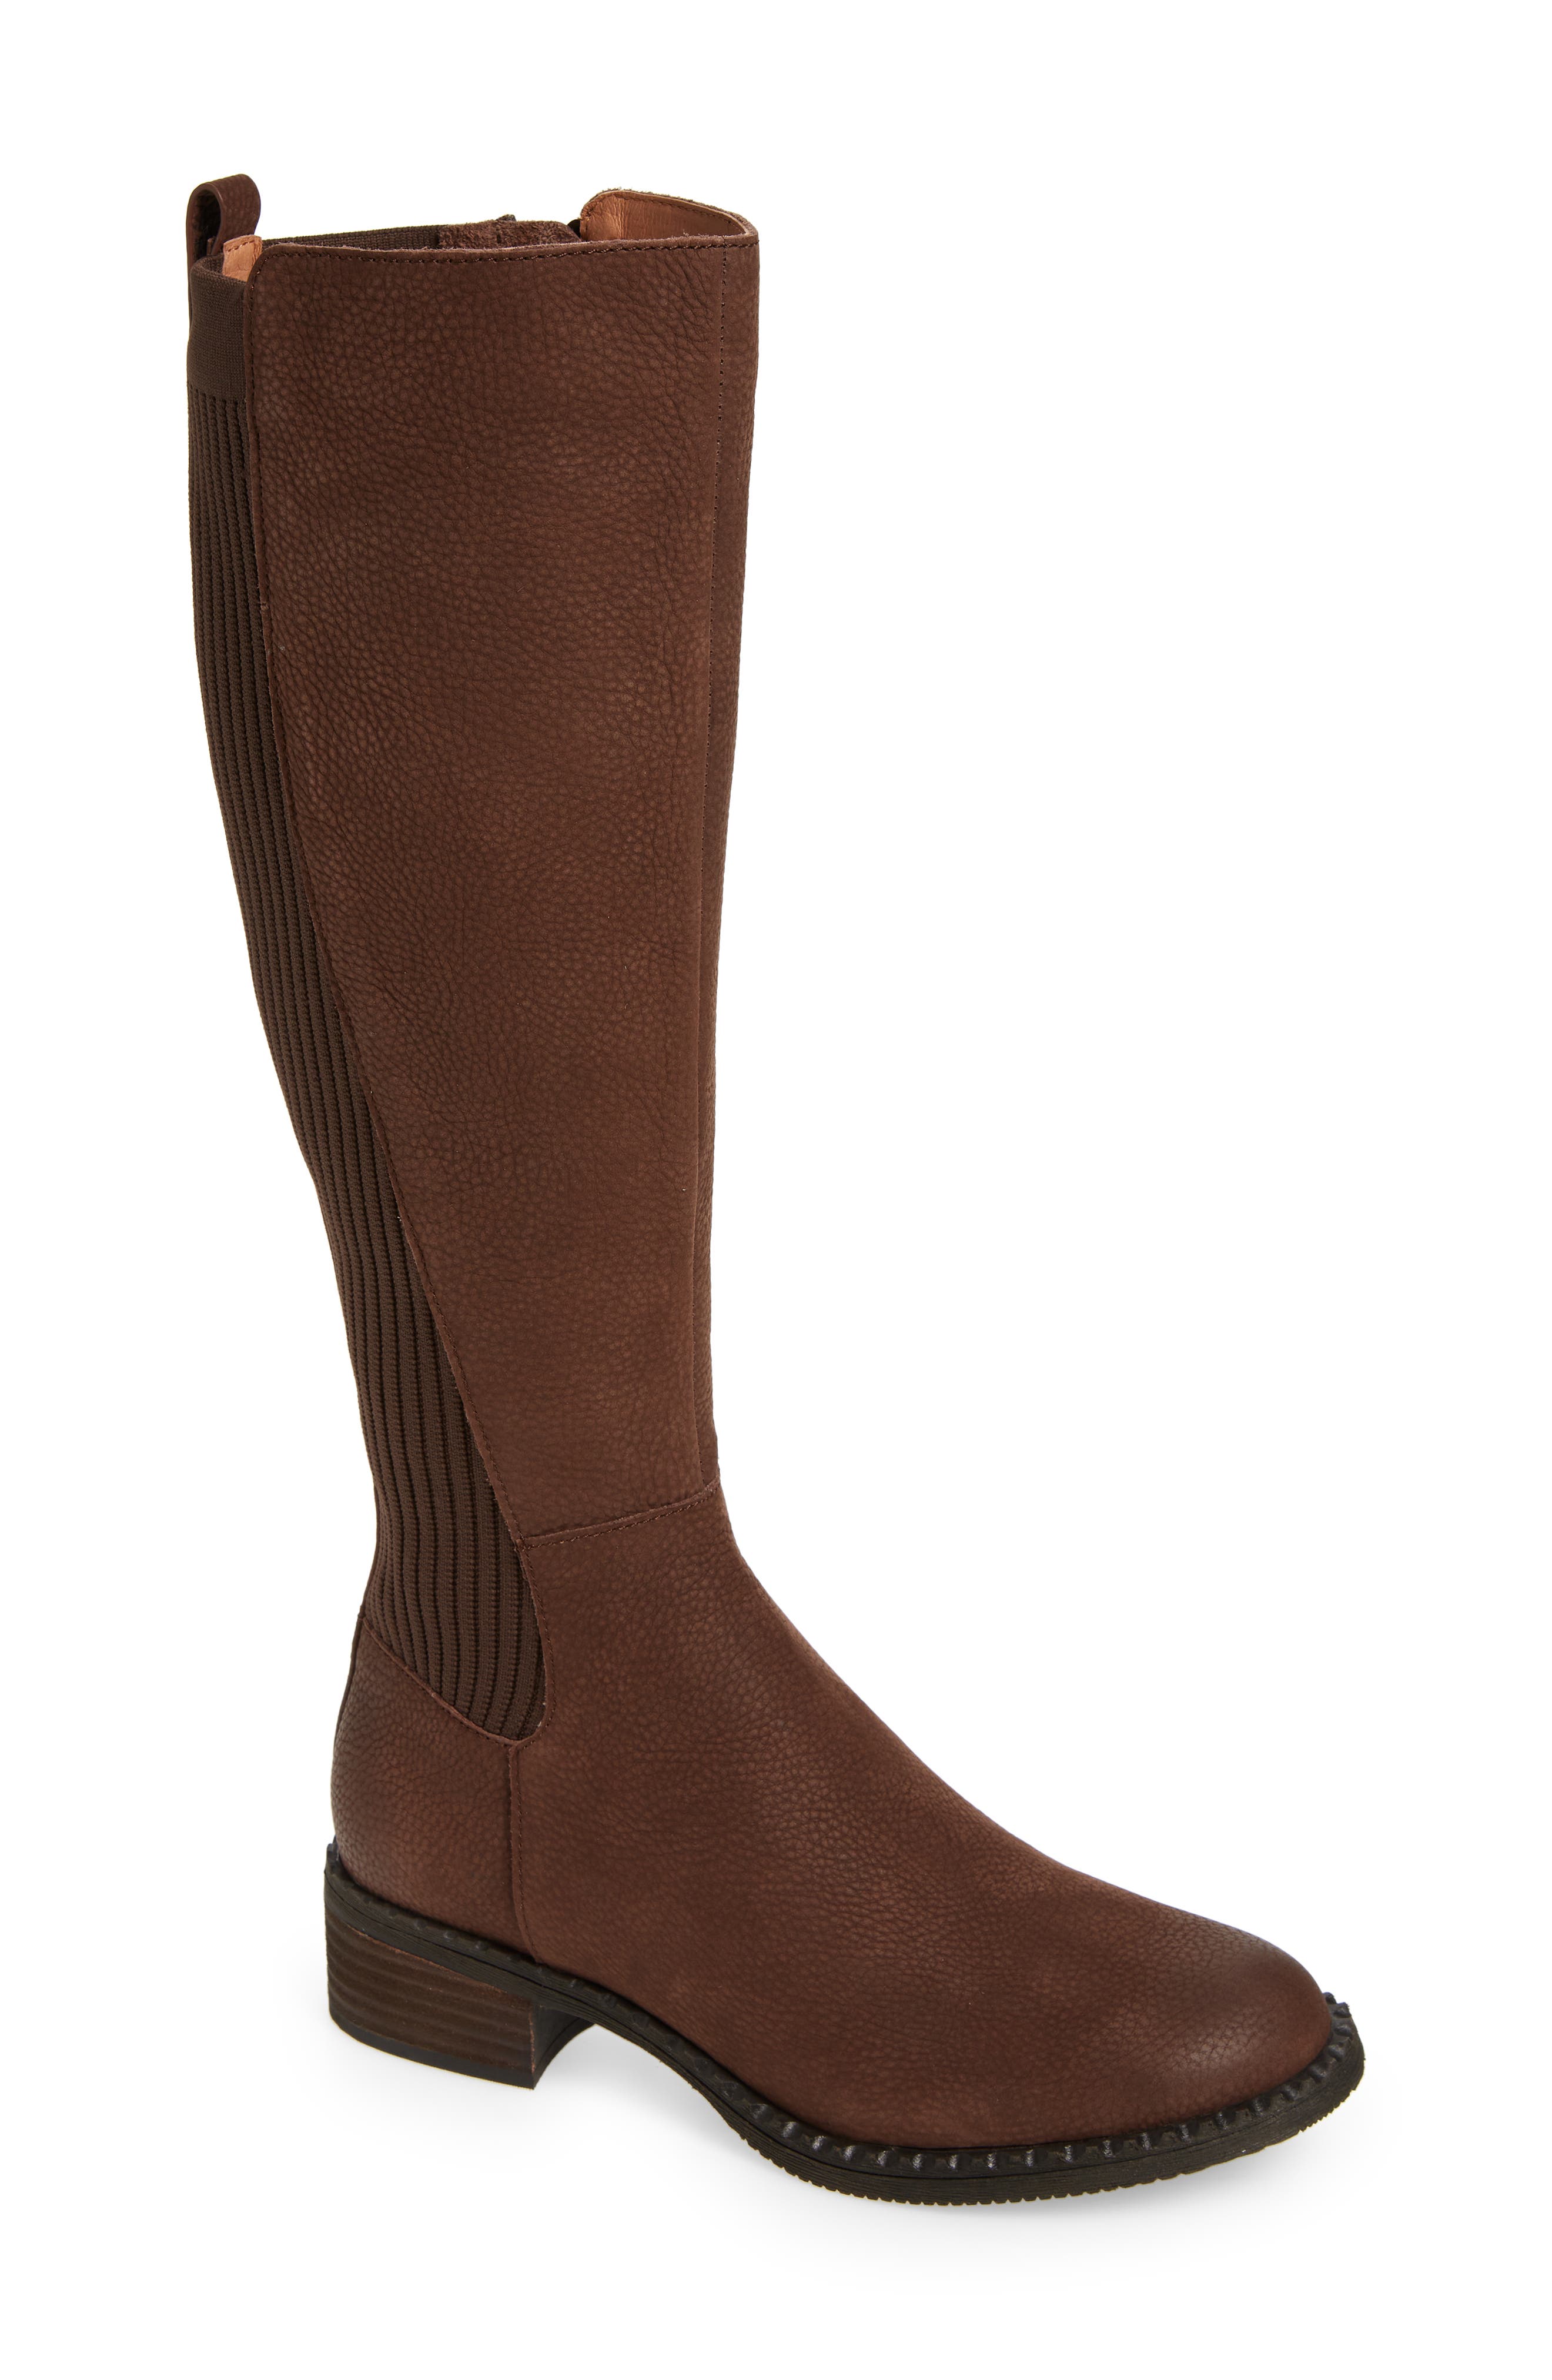 27 Edit Womens Suede Wide Calf Knee High Riding Boots Zip Brown 8.5W New 